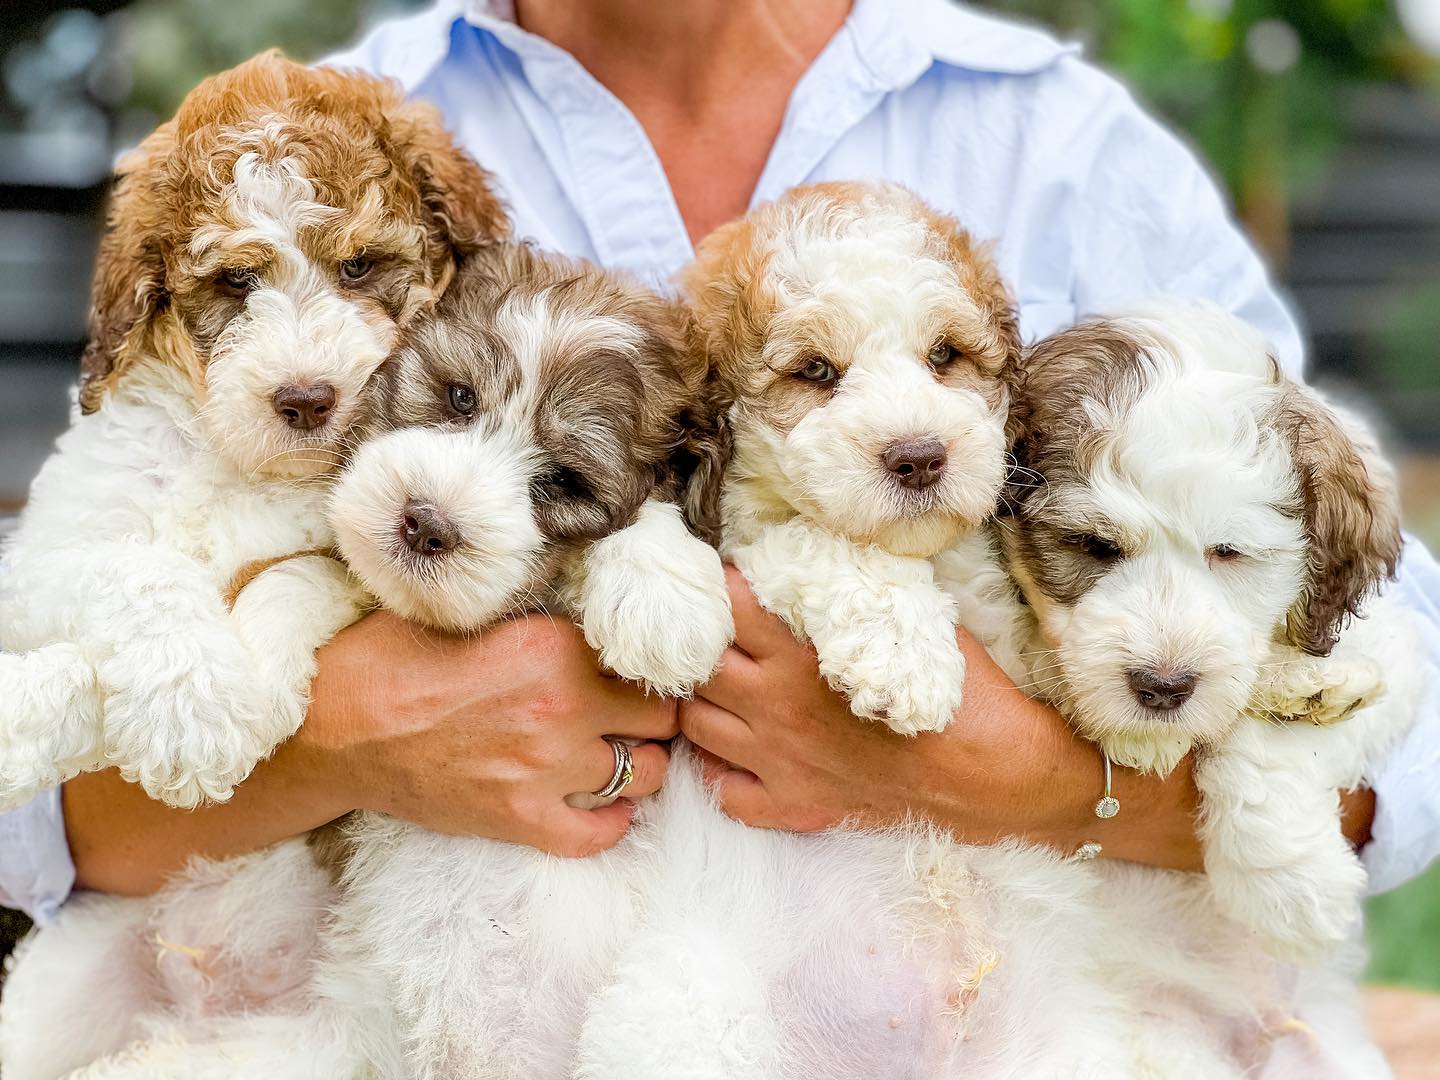 a group of brown and white parti colored teddy bear twoodle puppies being held